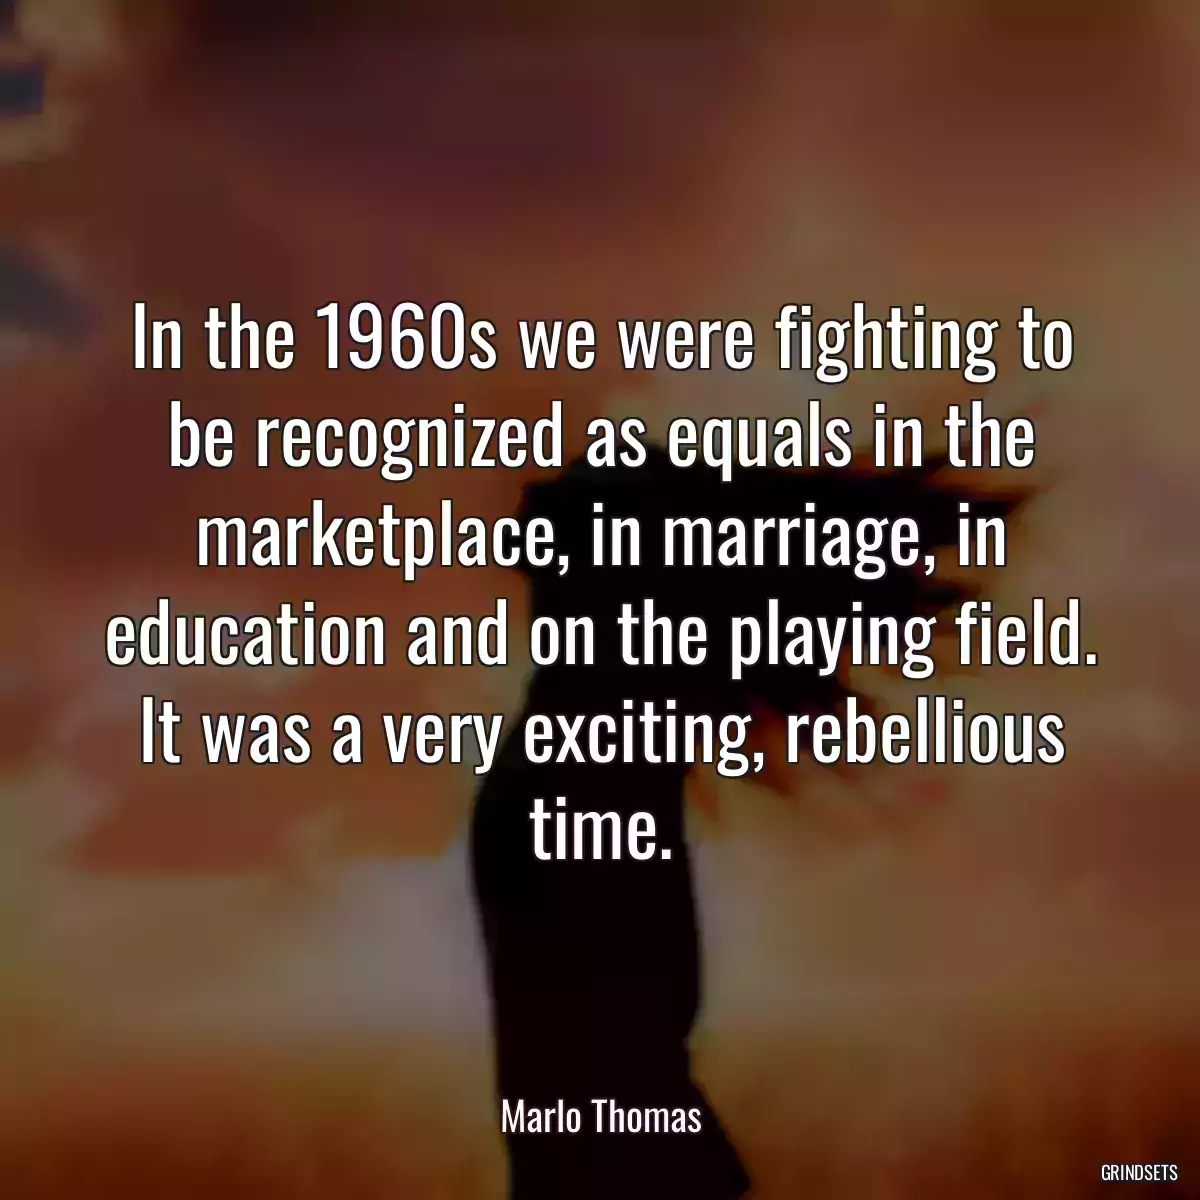 In the 1960s we were fighting to be recognized as equals in the marketplace, in marriage, in education and on the playing field. It was a very exciting, rebellious time.